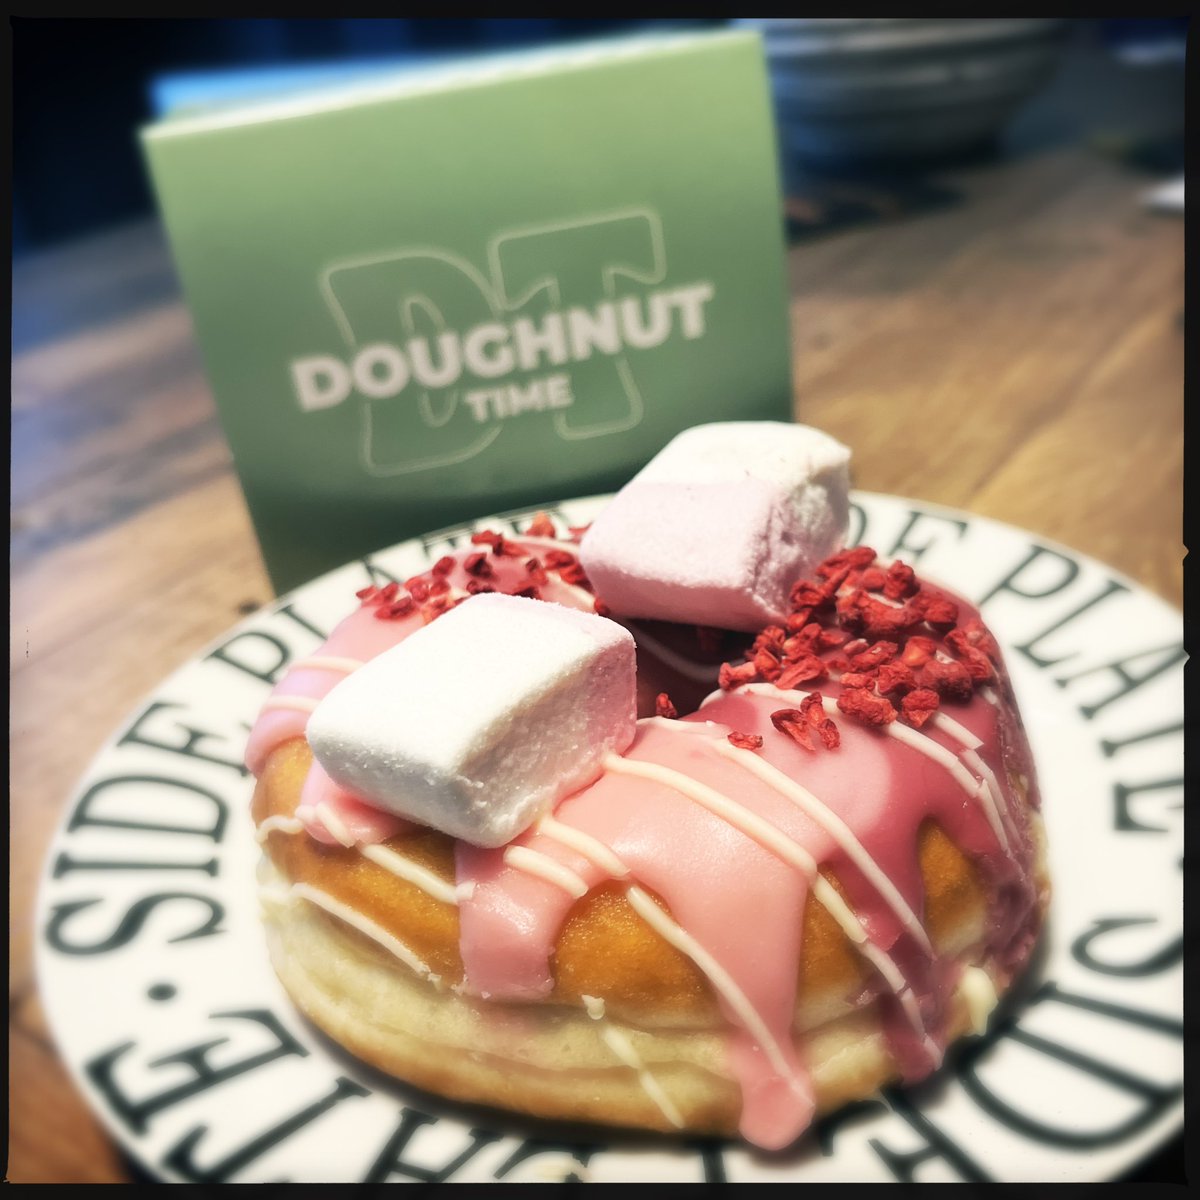 When you have a lovely catch up and get treated to a belated birthday doughnut from @doughnuttime_uk, you have your Monday #BeThankful 🍩